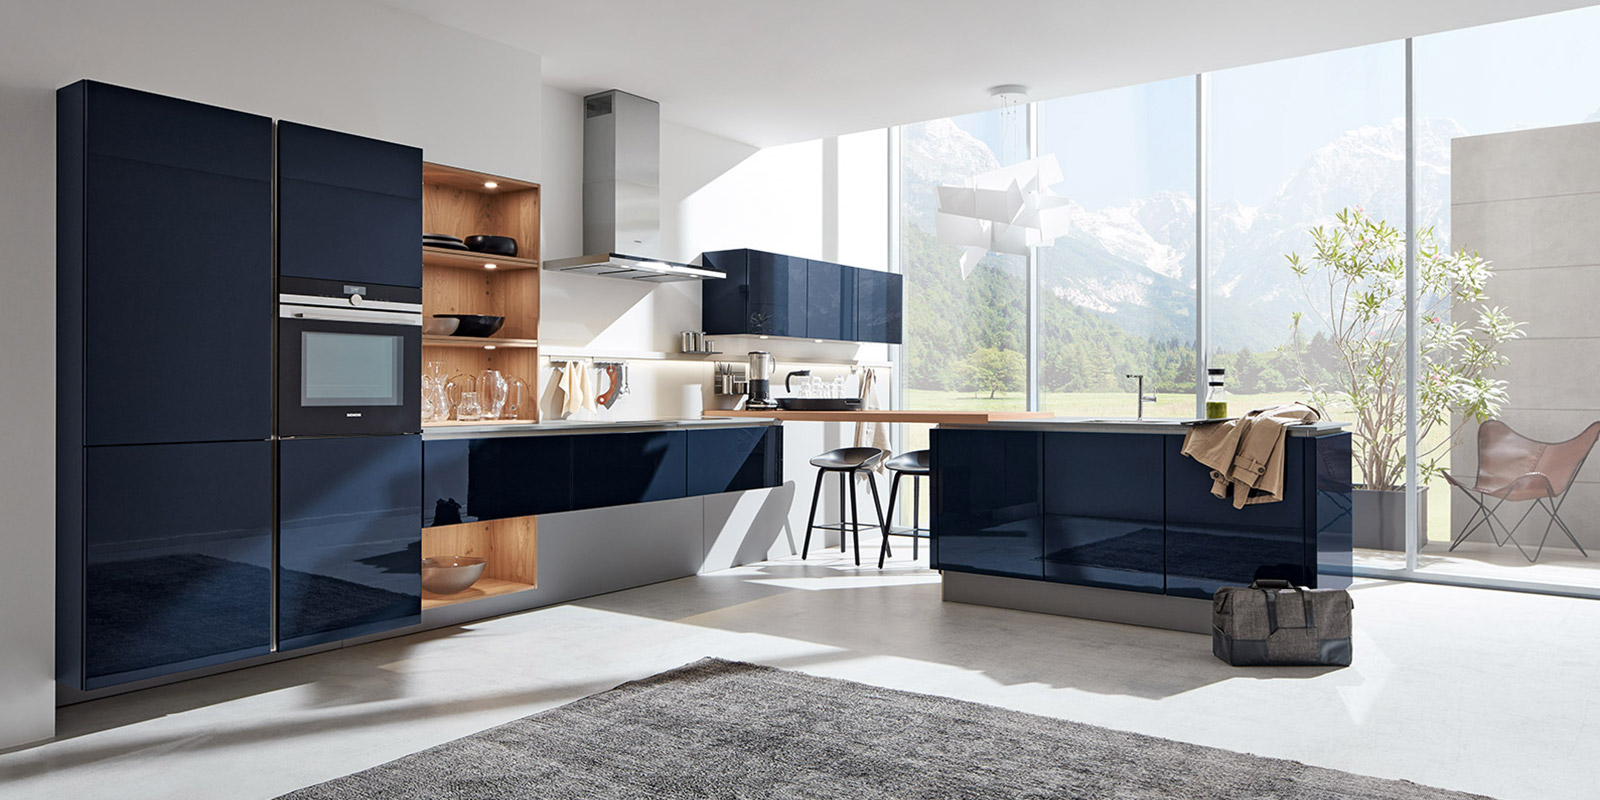 Top 10 Modular Kitchen Fitting Brands For Your Home in India